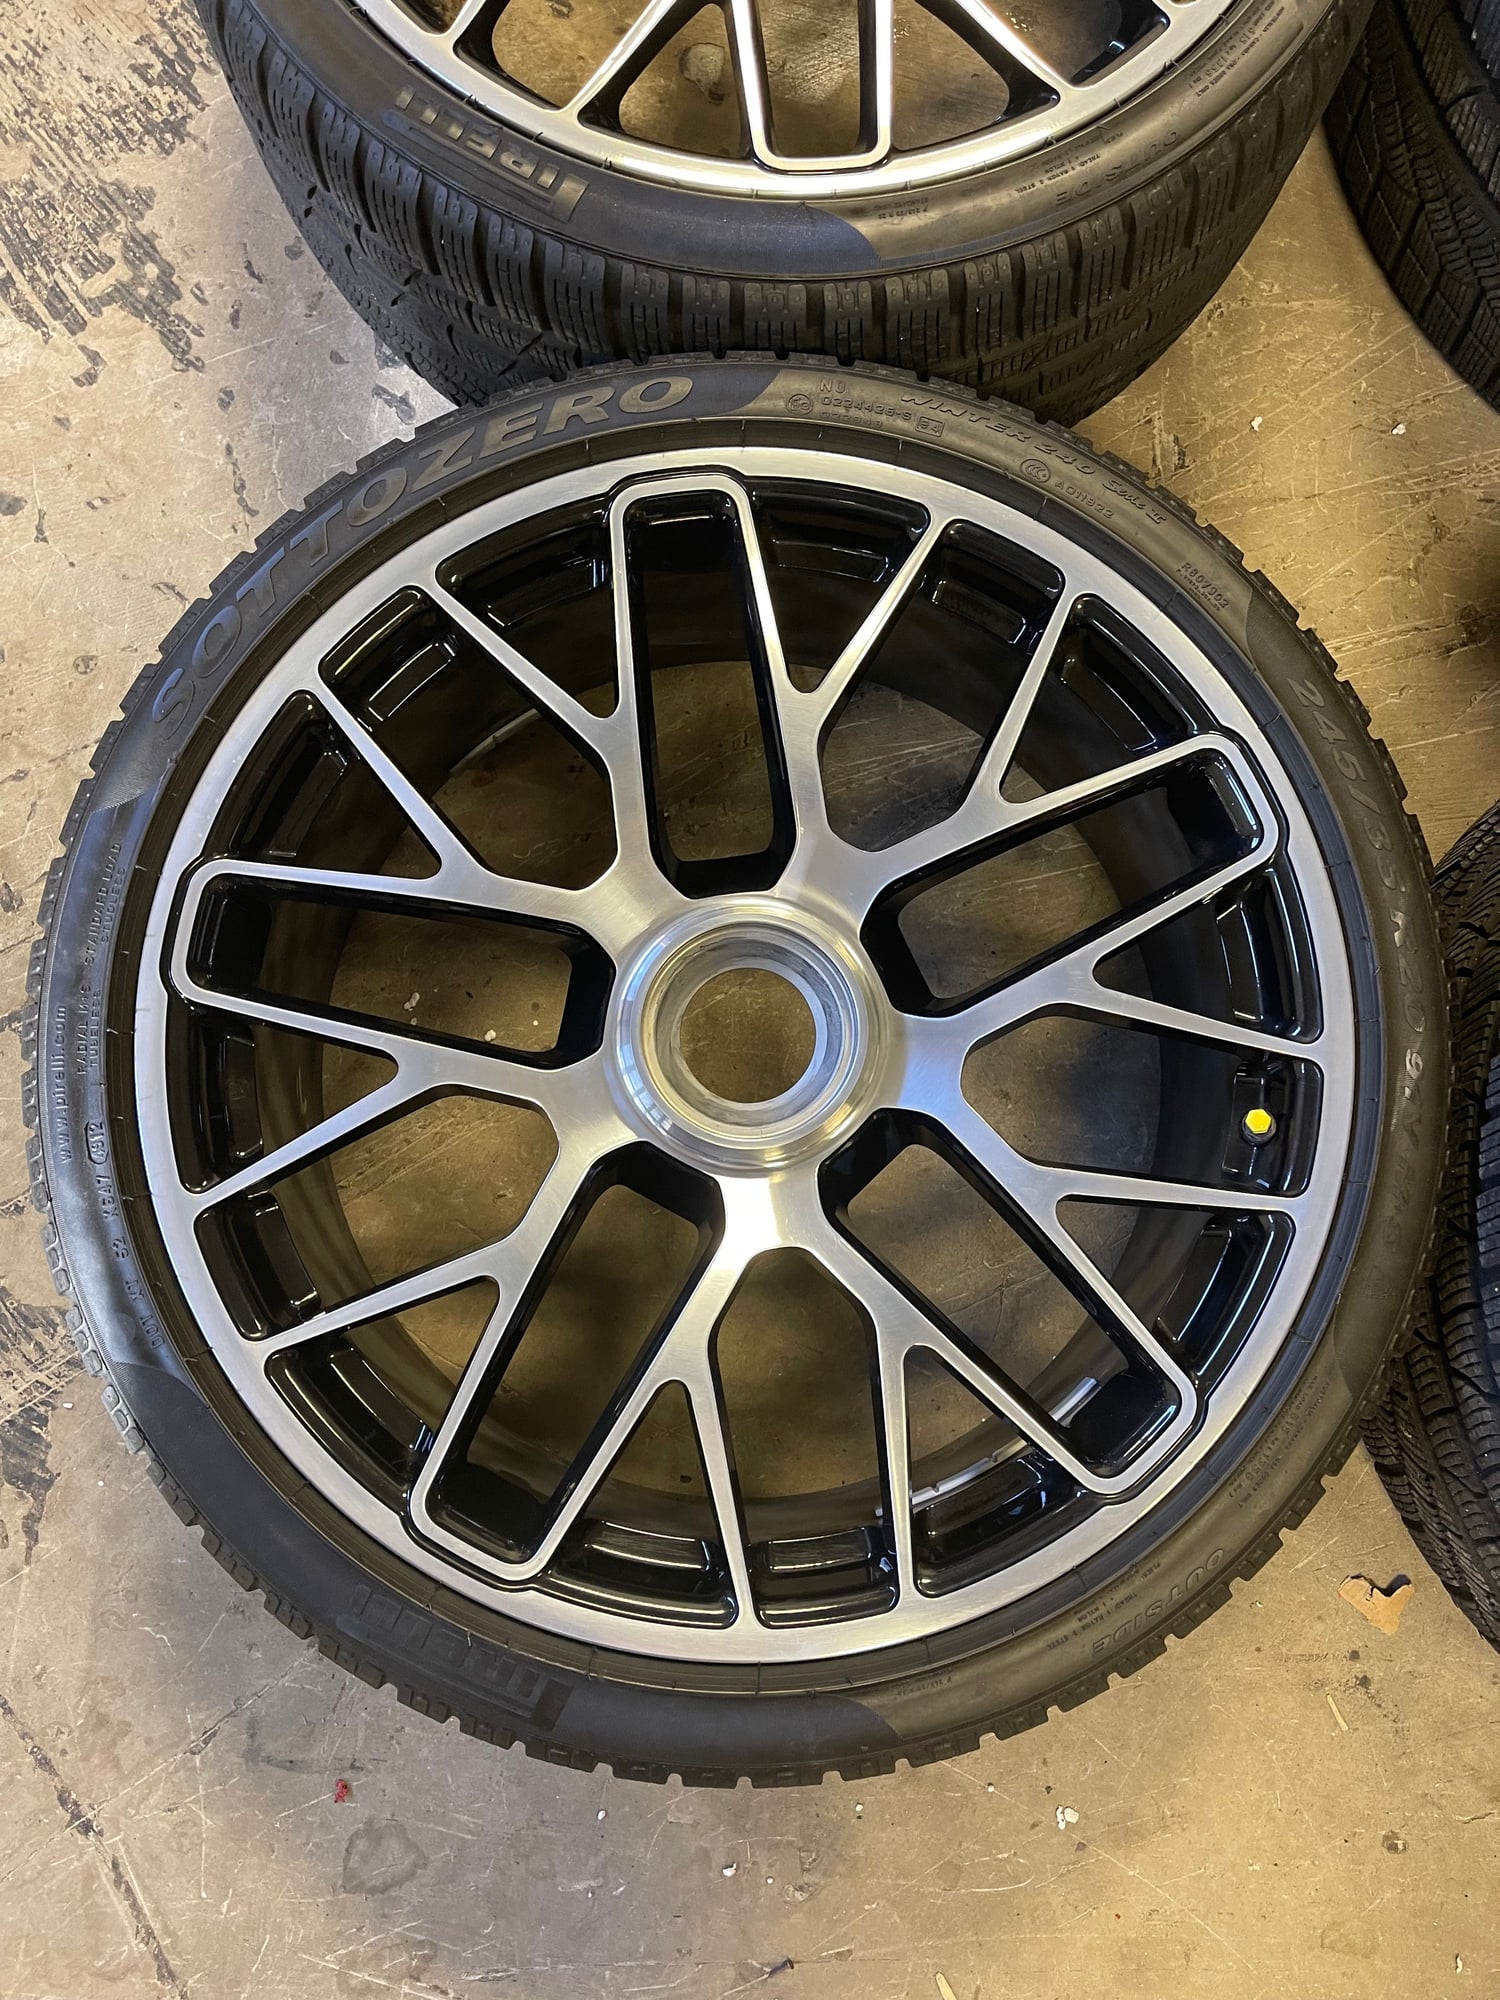 Wheels and Tires/Axles - 991.1 Turbo S Center Lock wheels with Pirelli Sottozero M&S tires - Used - 2014 to 2016 Porsche 911 - Hudson, NH 03051, United States